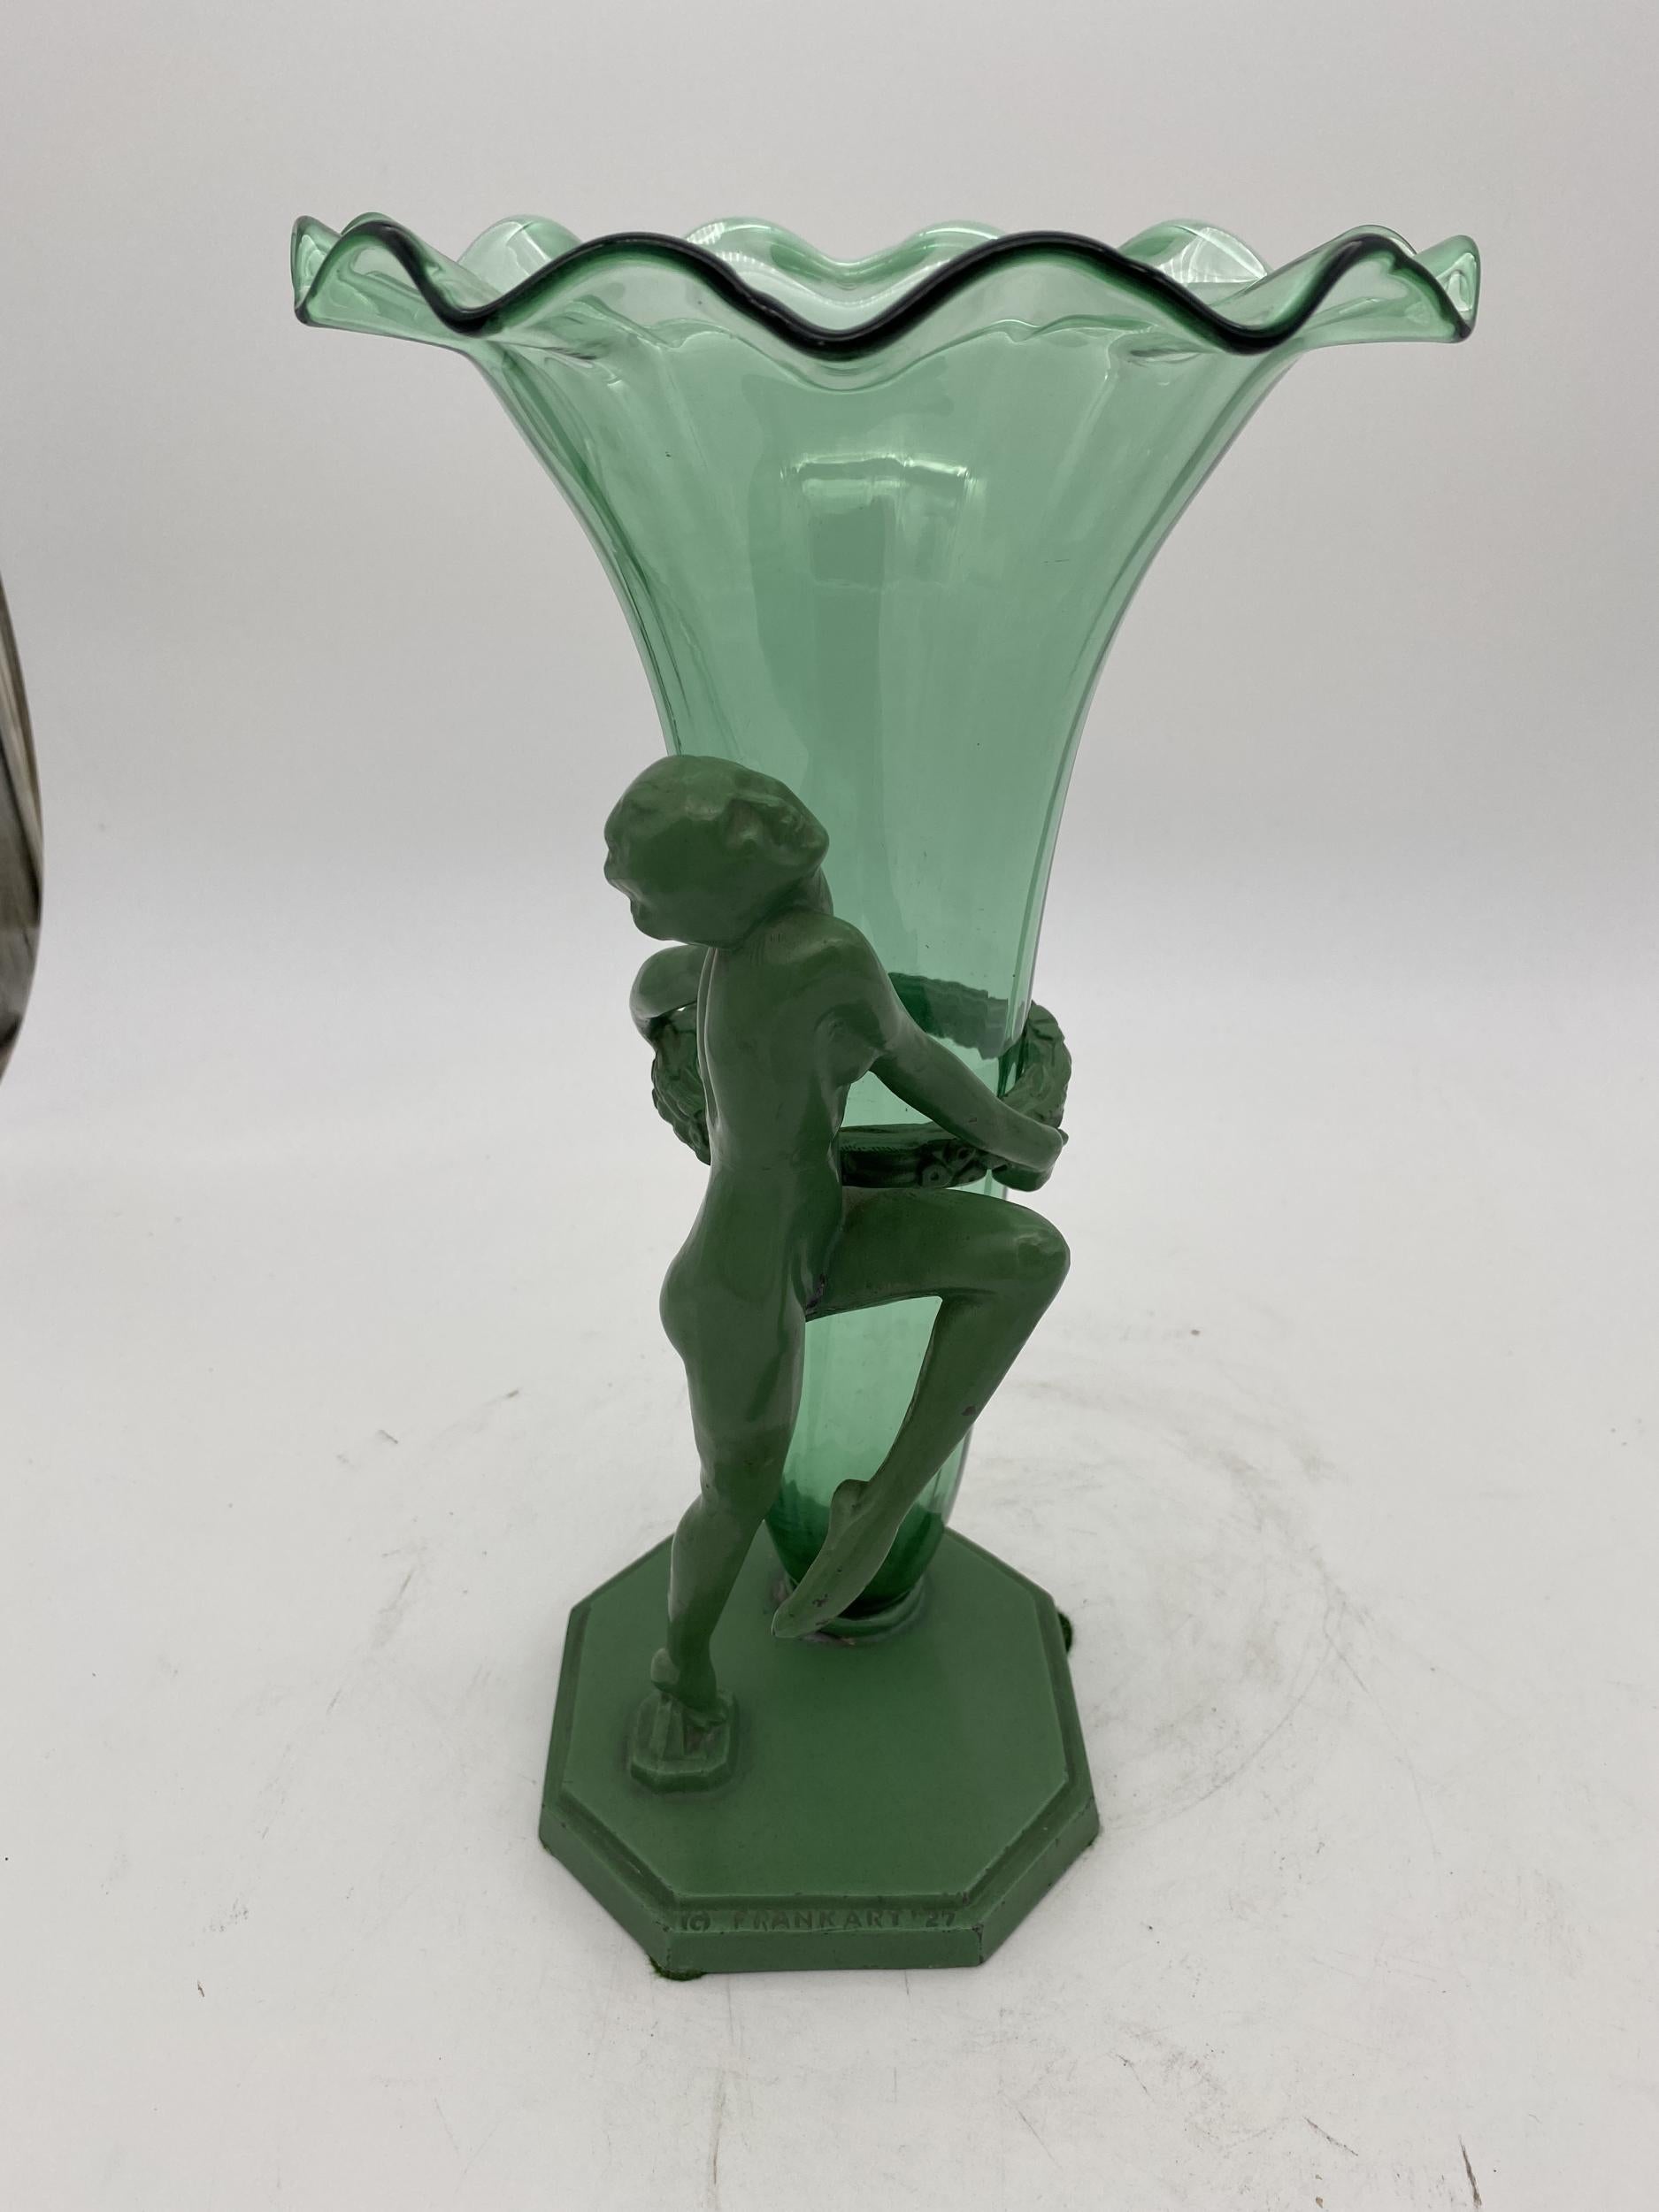 This Frankart model F6512 nude spelter metal Art Deco vase features an Art Deco styled nude female nymph holding up Steuden glass vase.

Stamped 